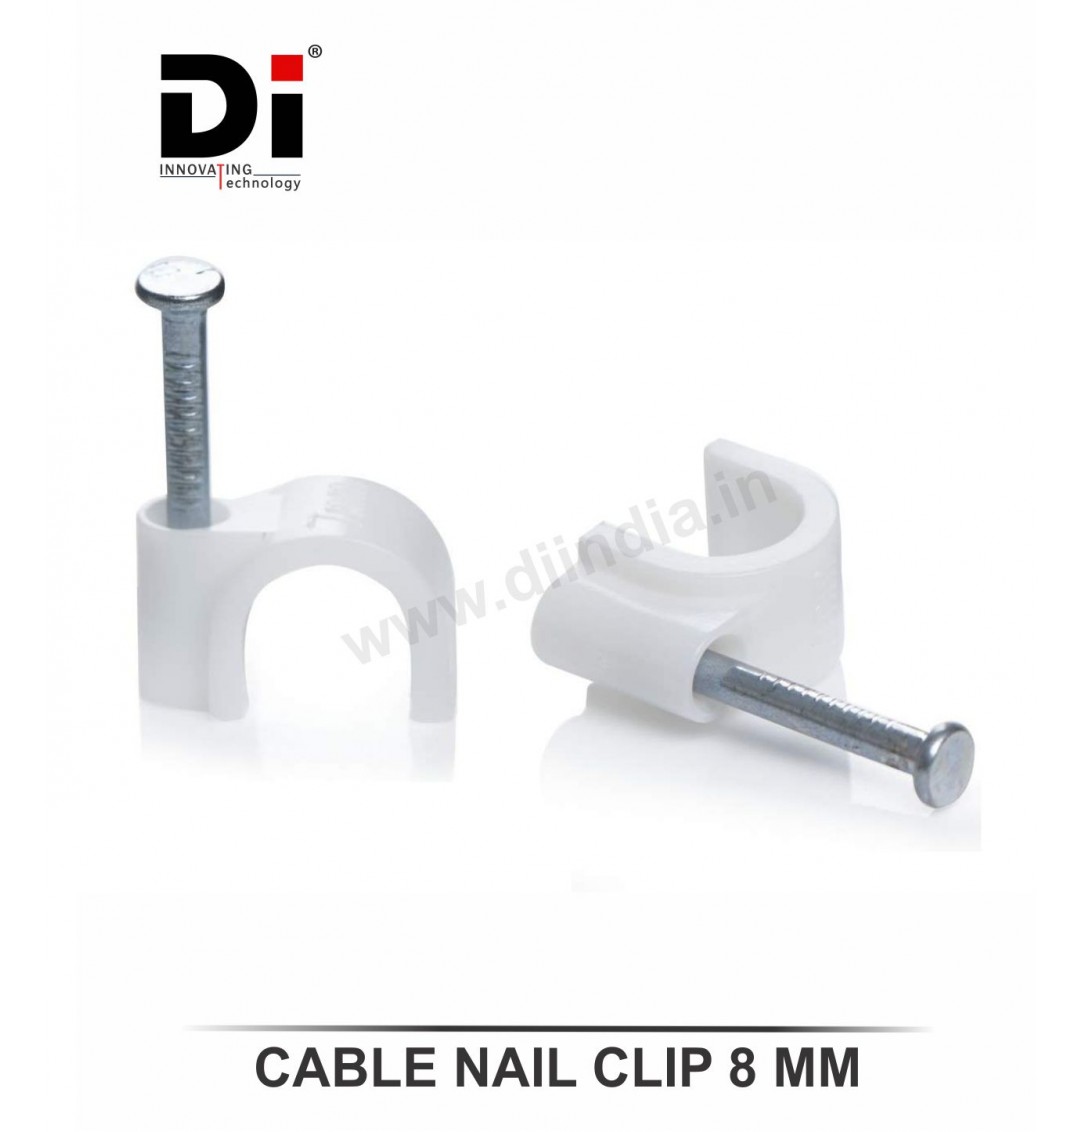 CABLE NAIL CLIP 8MM ( INCLUDING GST )